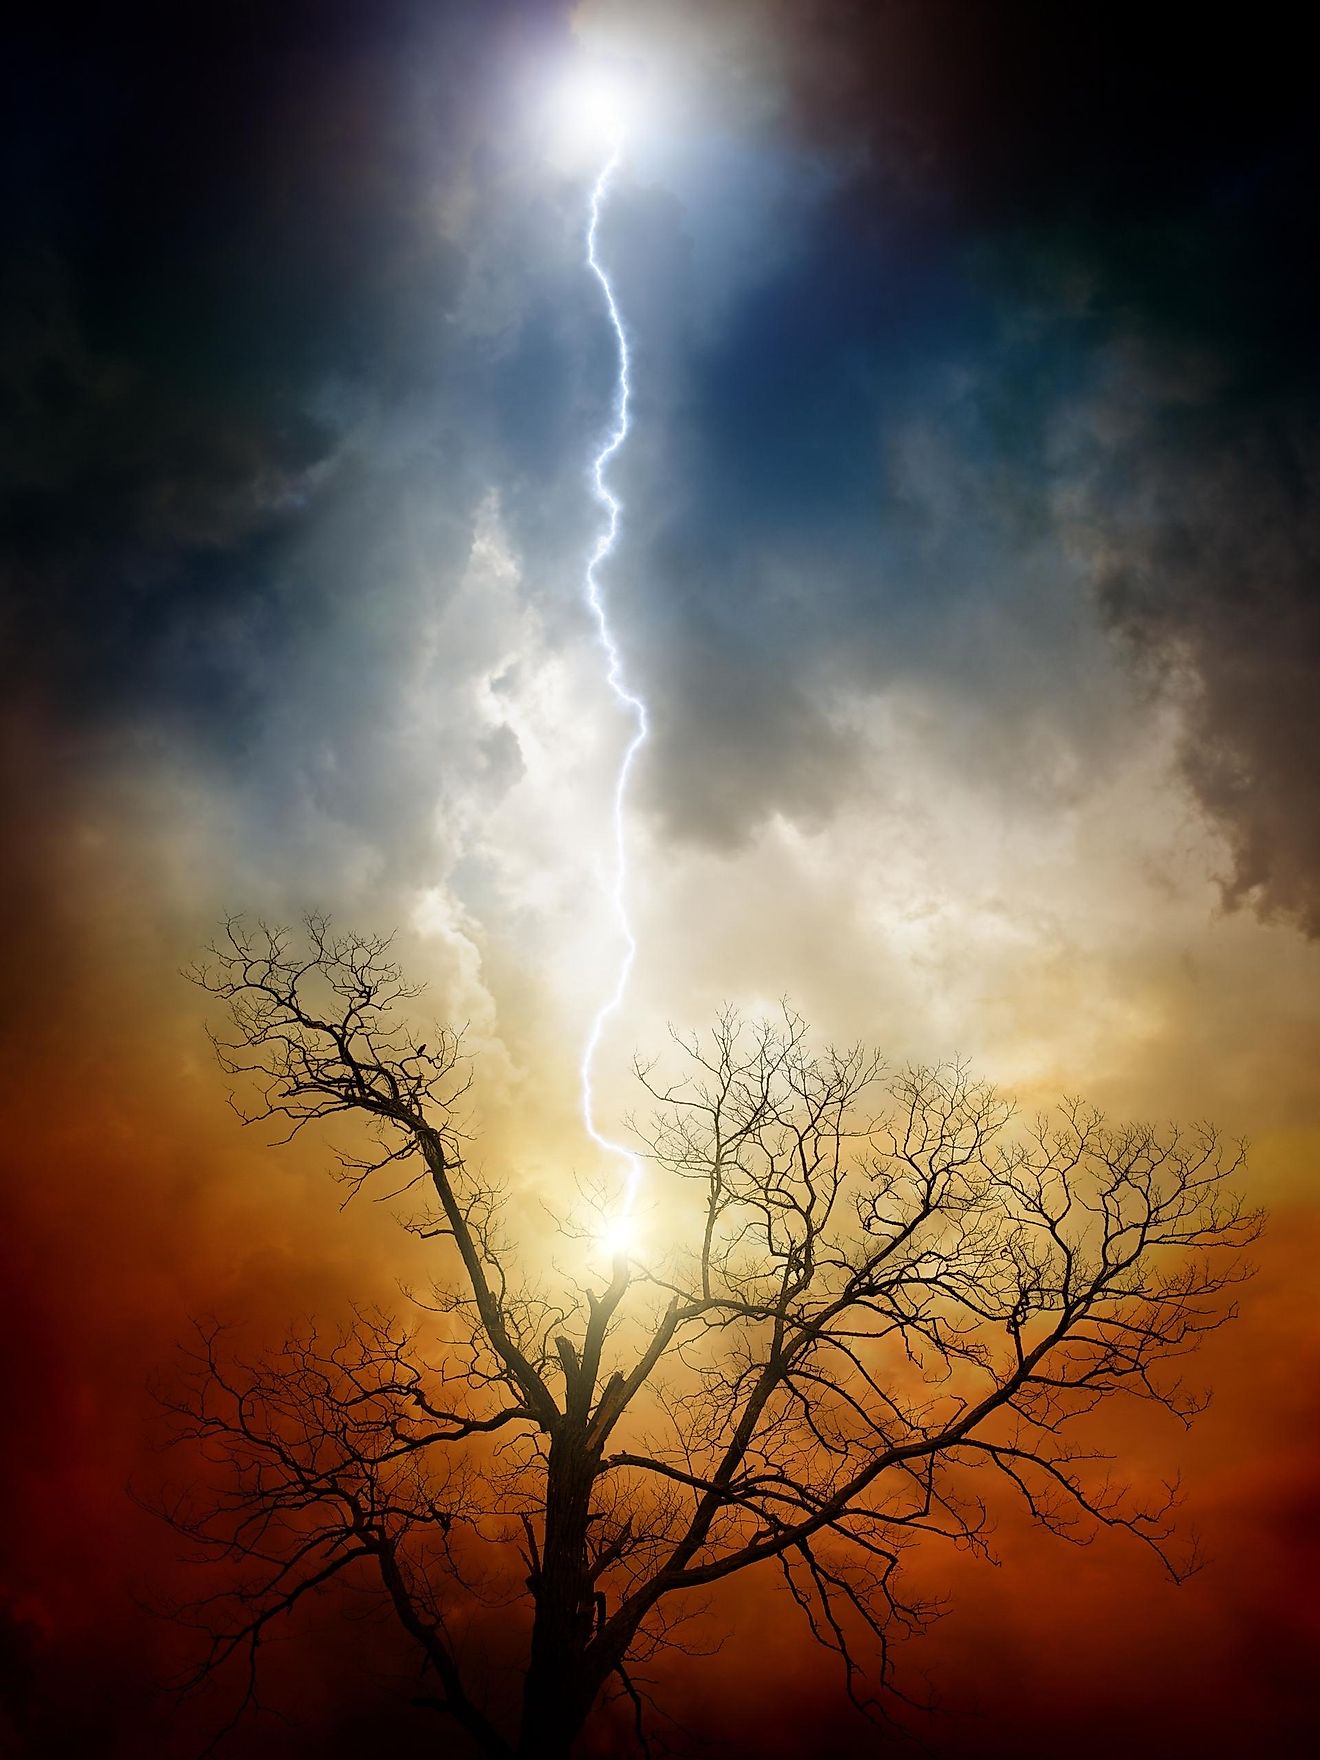 Due to the fact that a lighting strike transmits enormous amounts of heat, it can make a tree explode, literally.